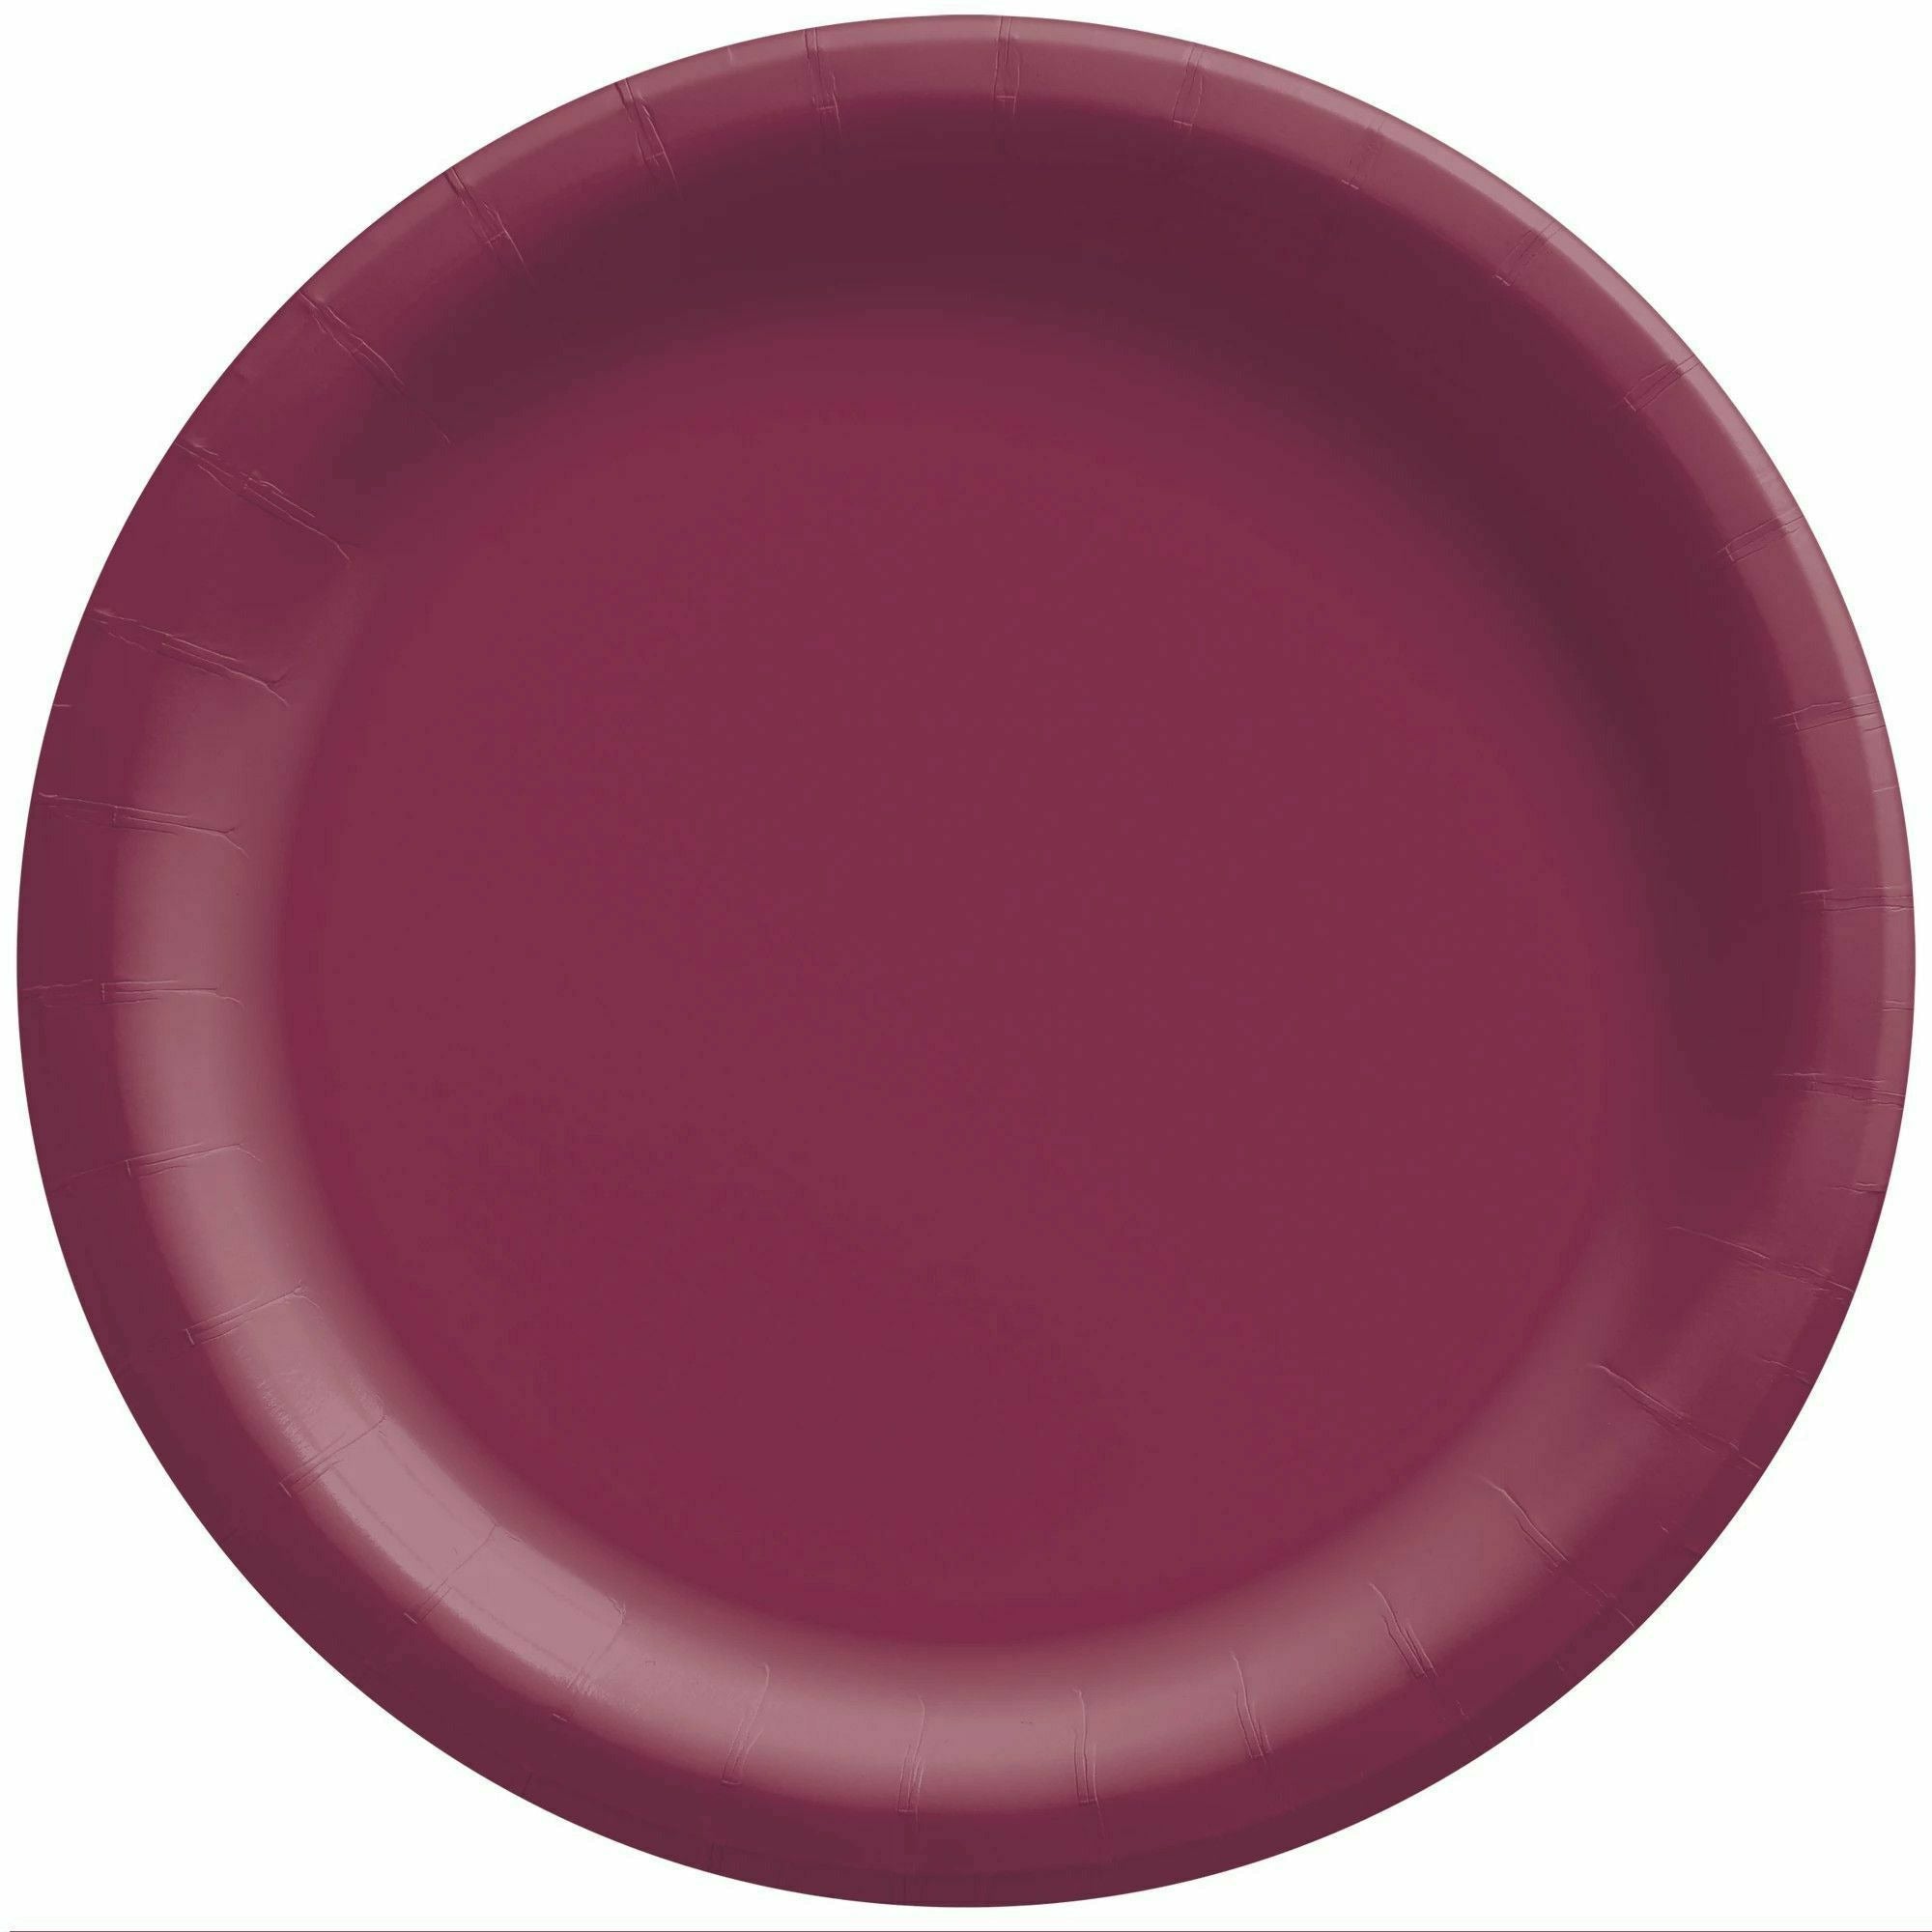 Amscan BASIC Berry - 6 3/4" Round Paper Plates, 20Ct.